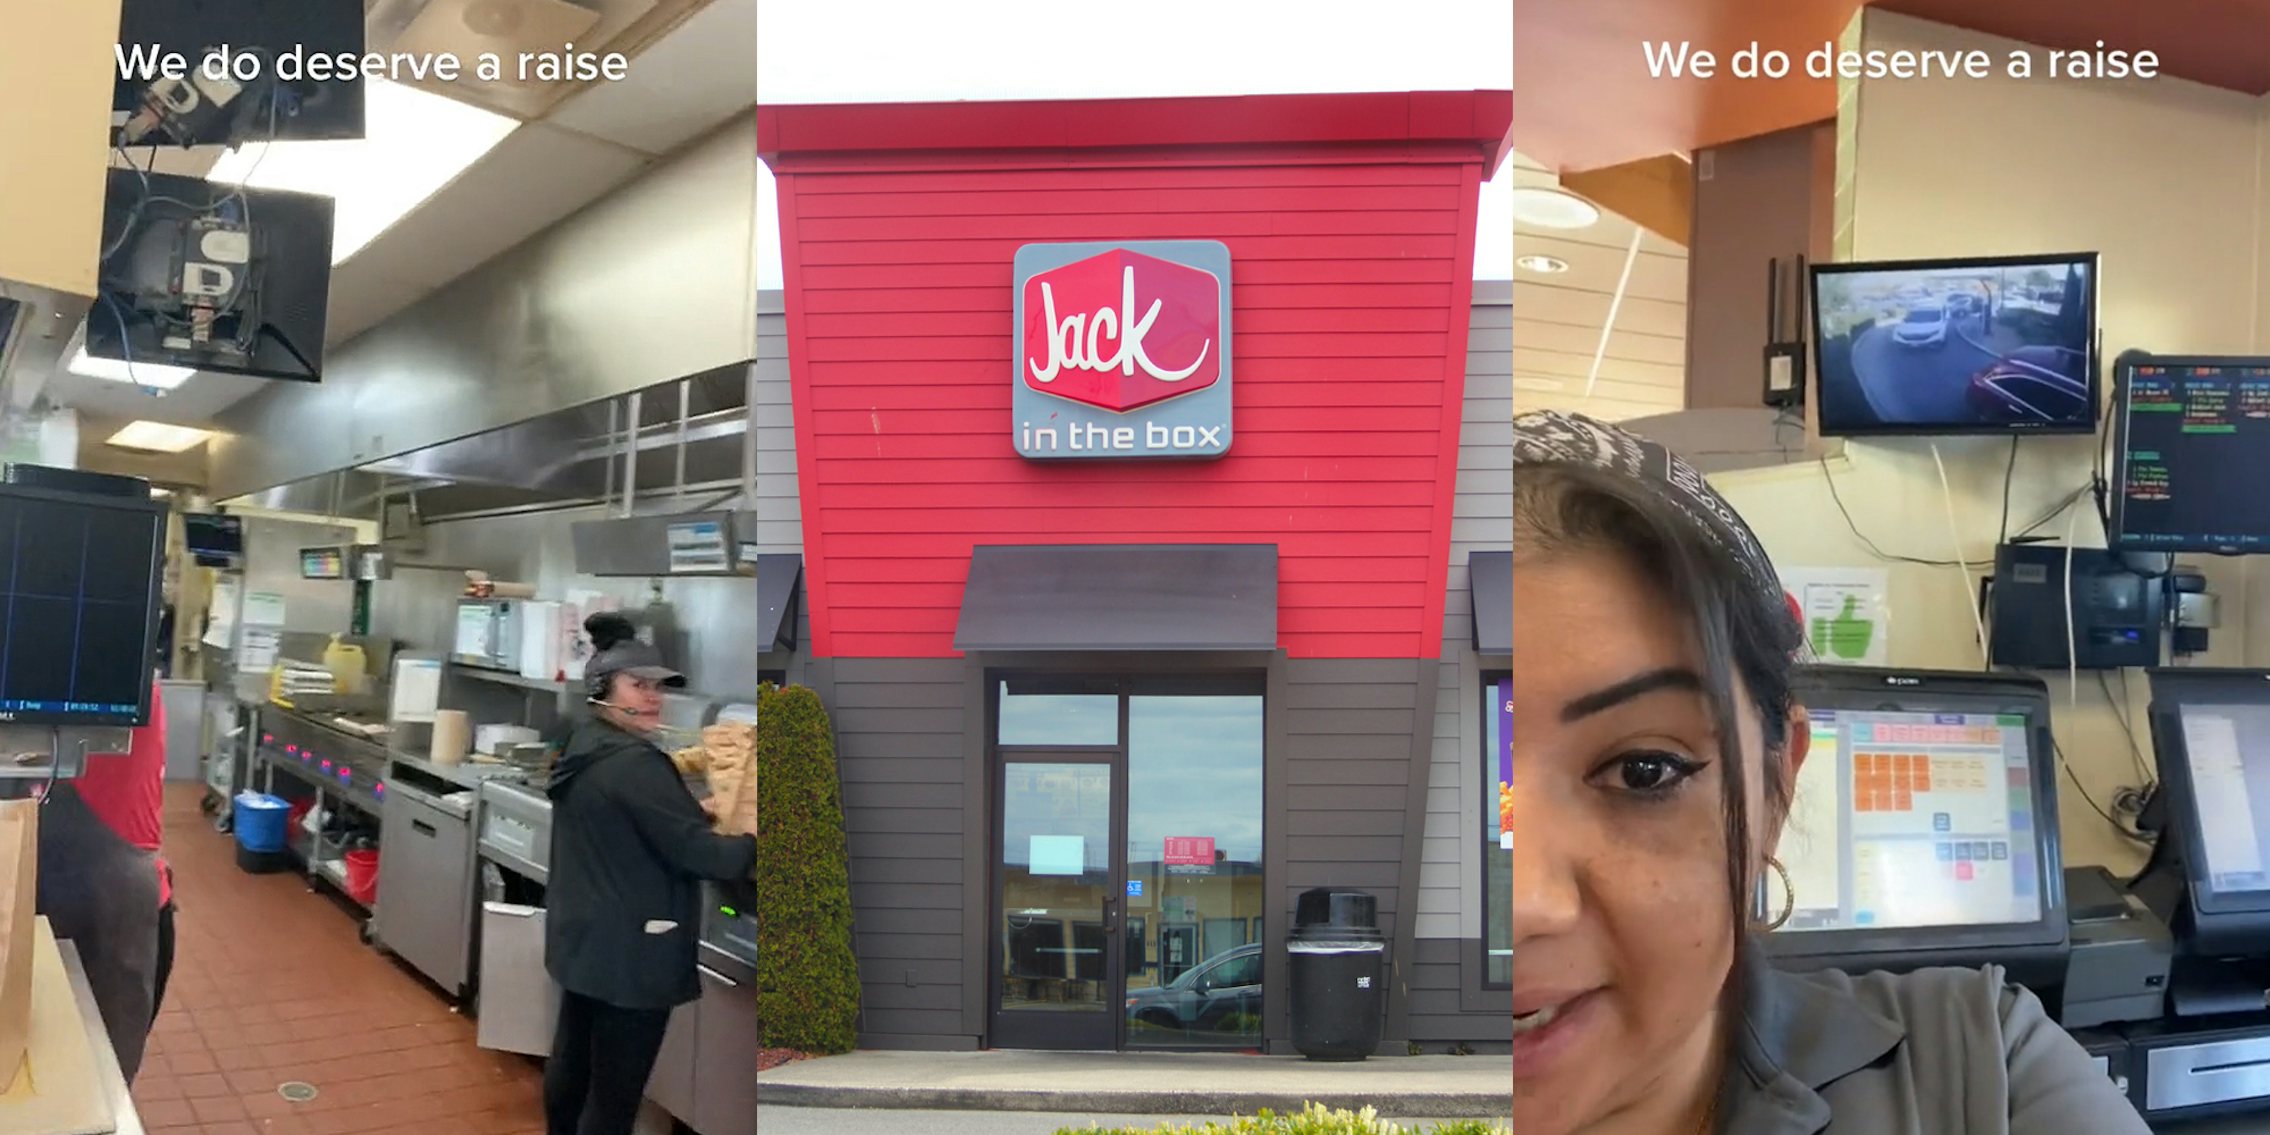 Jack in the box employees in kitchen caption 'We do deserve a raise' (l) Jack in the box sign on building (c) Jack in the box employee showing order system with caption 'We do deserve a raise' (r)